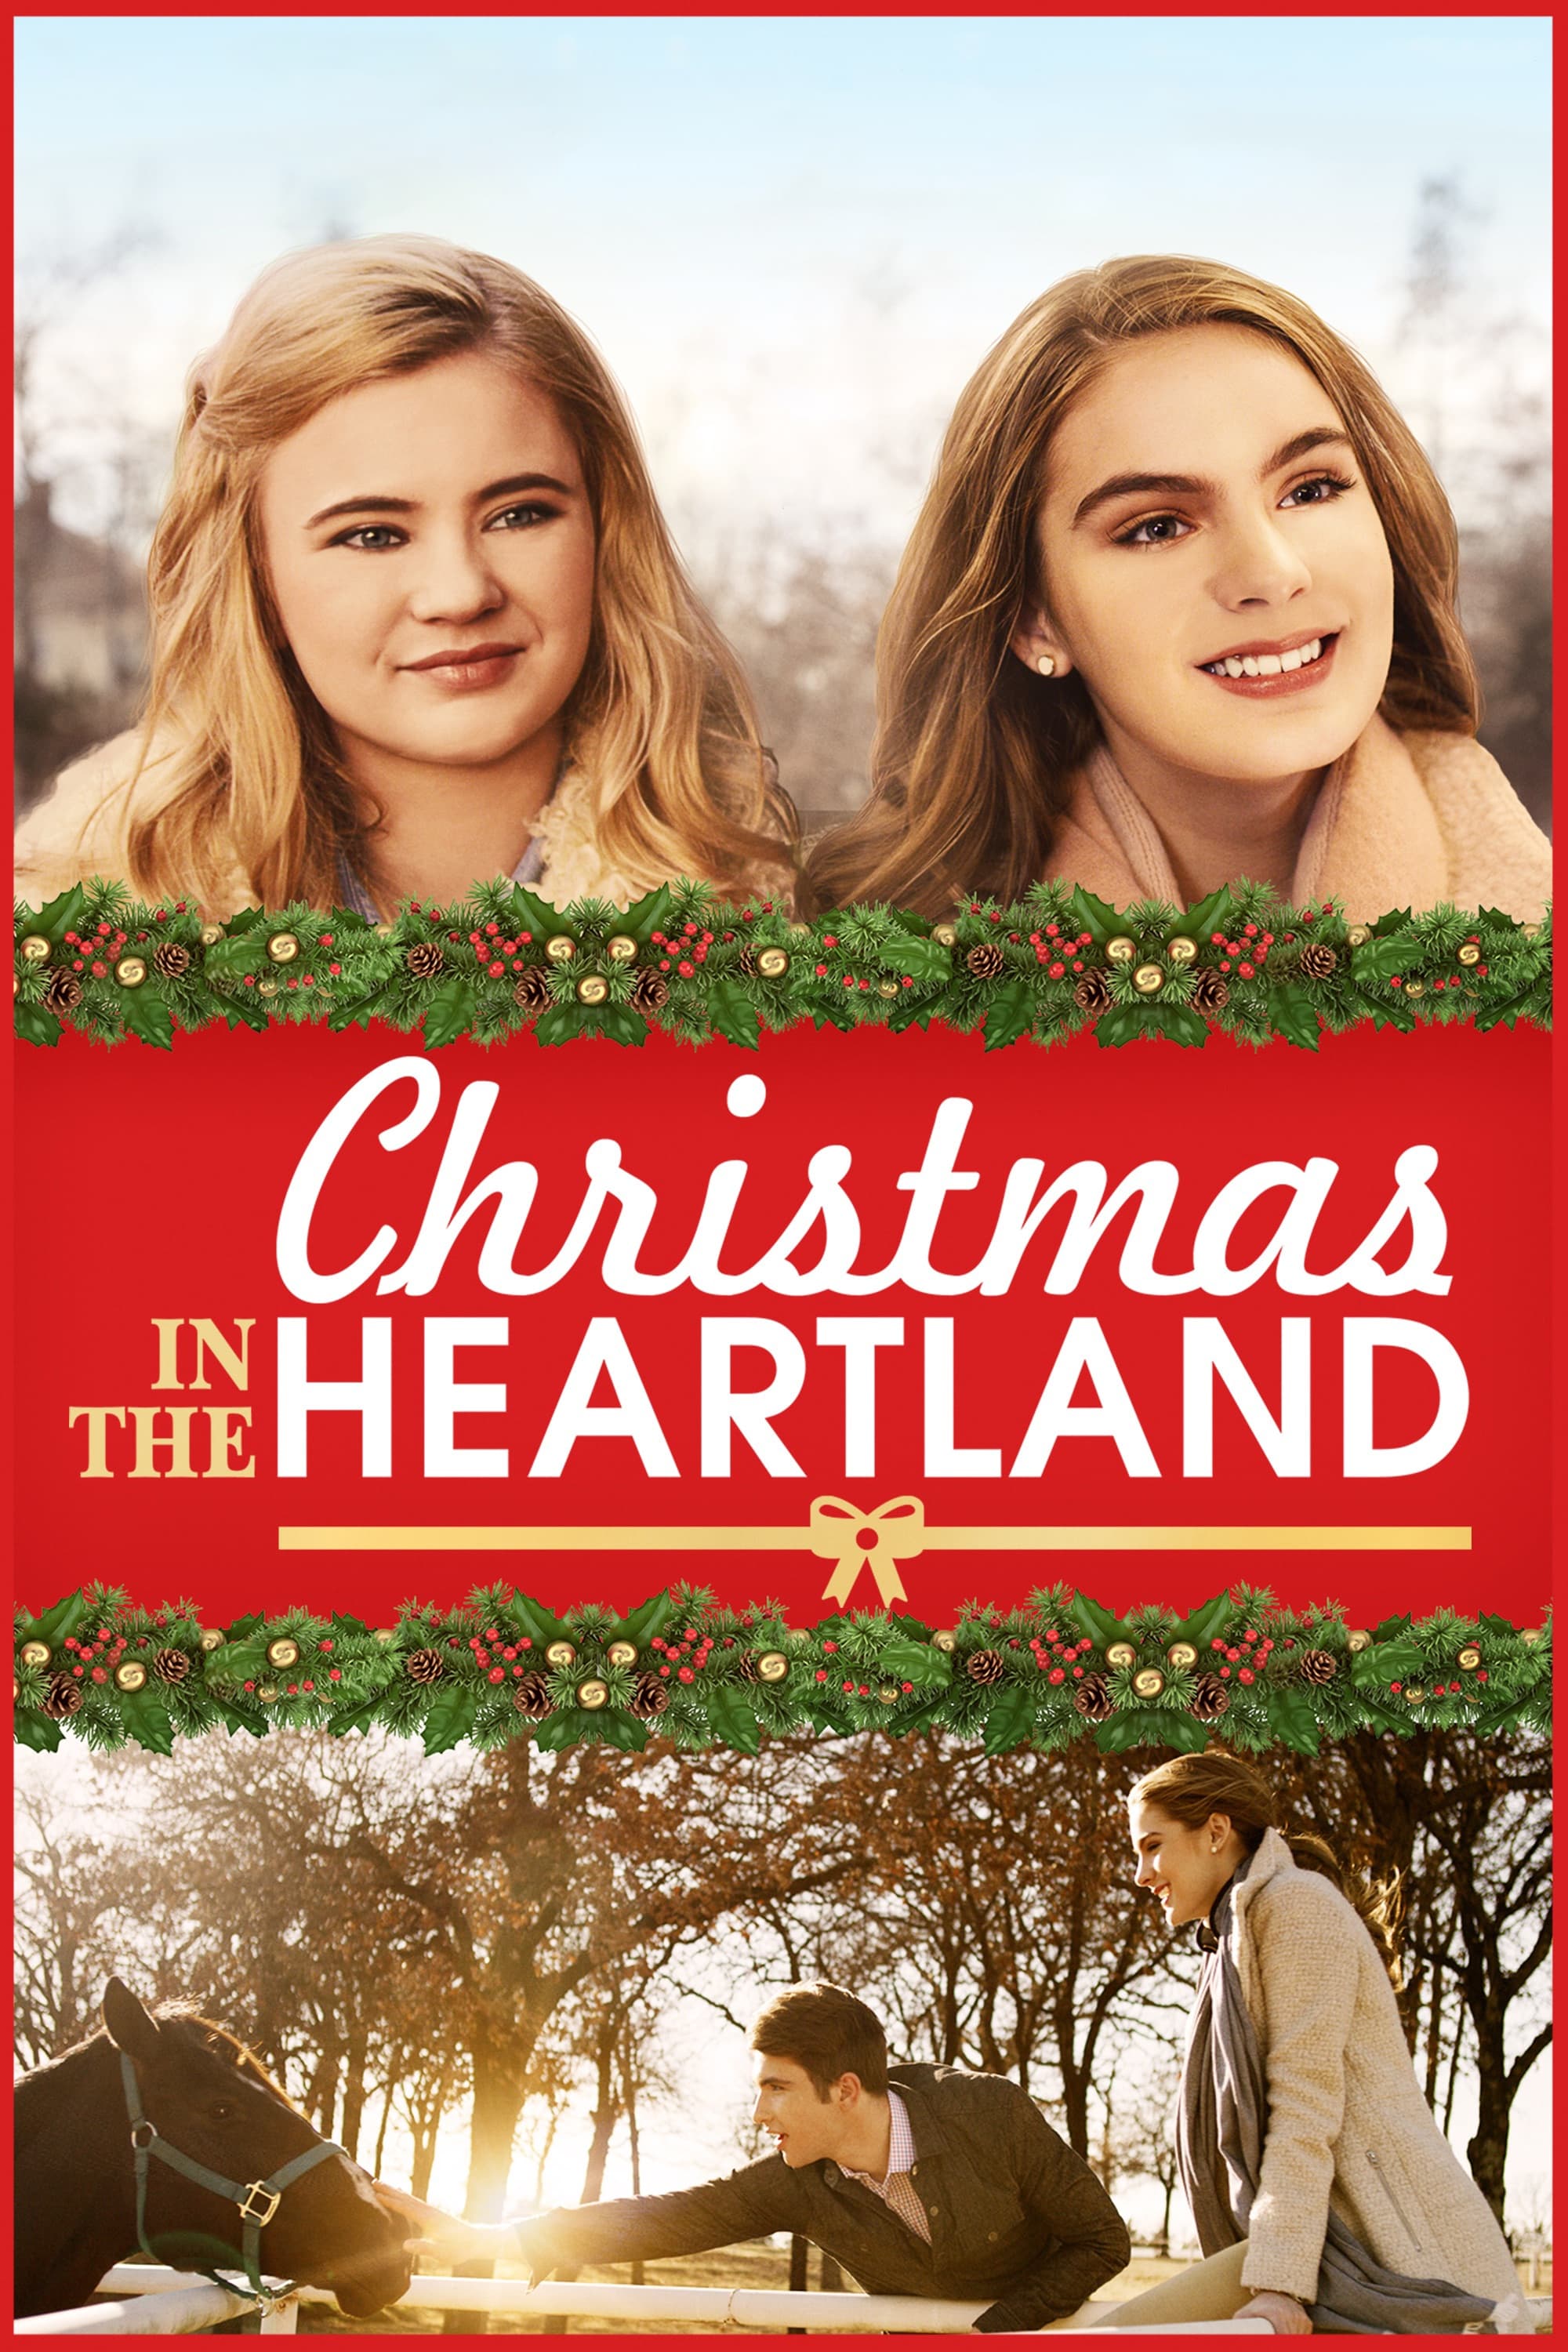 Christmas in the Heartland film